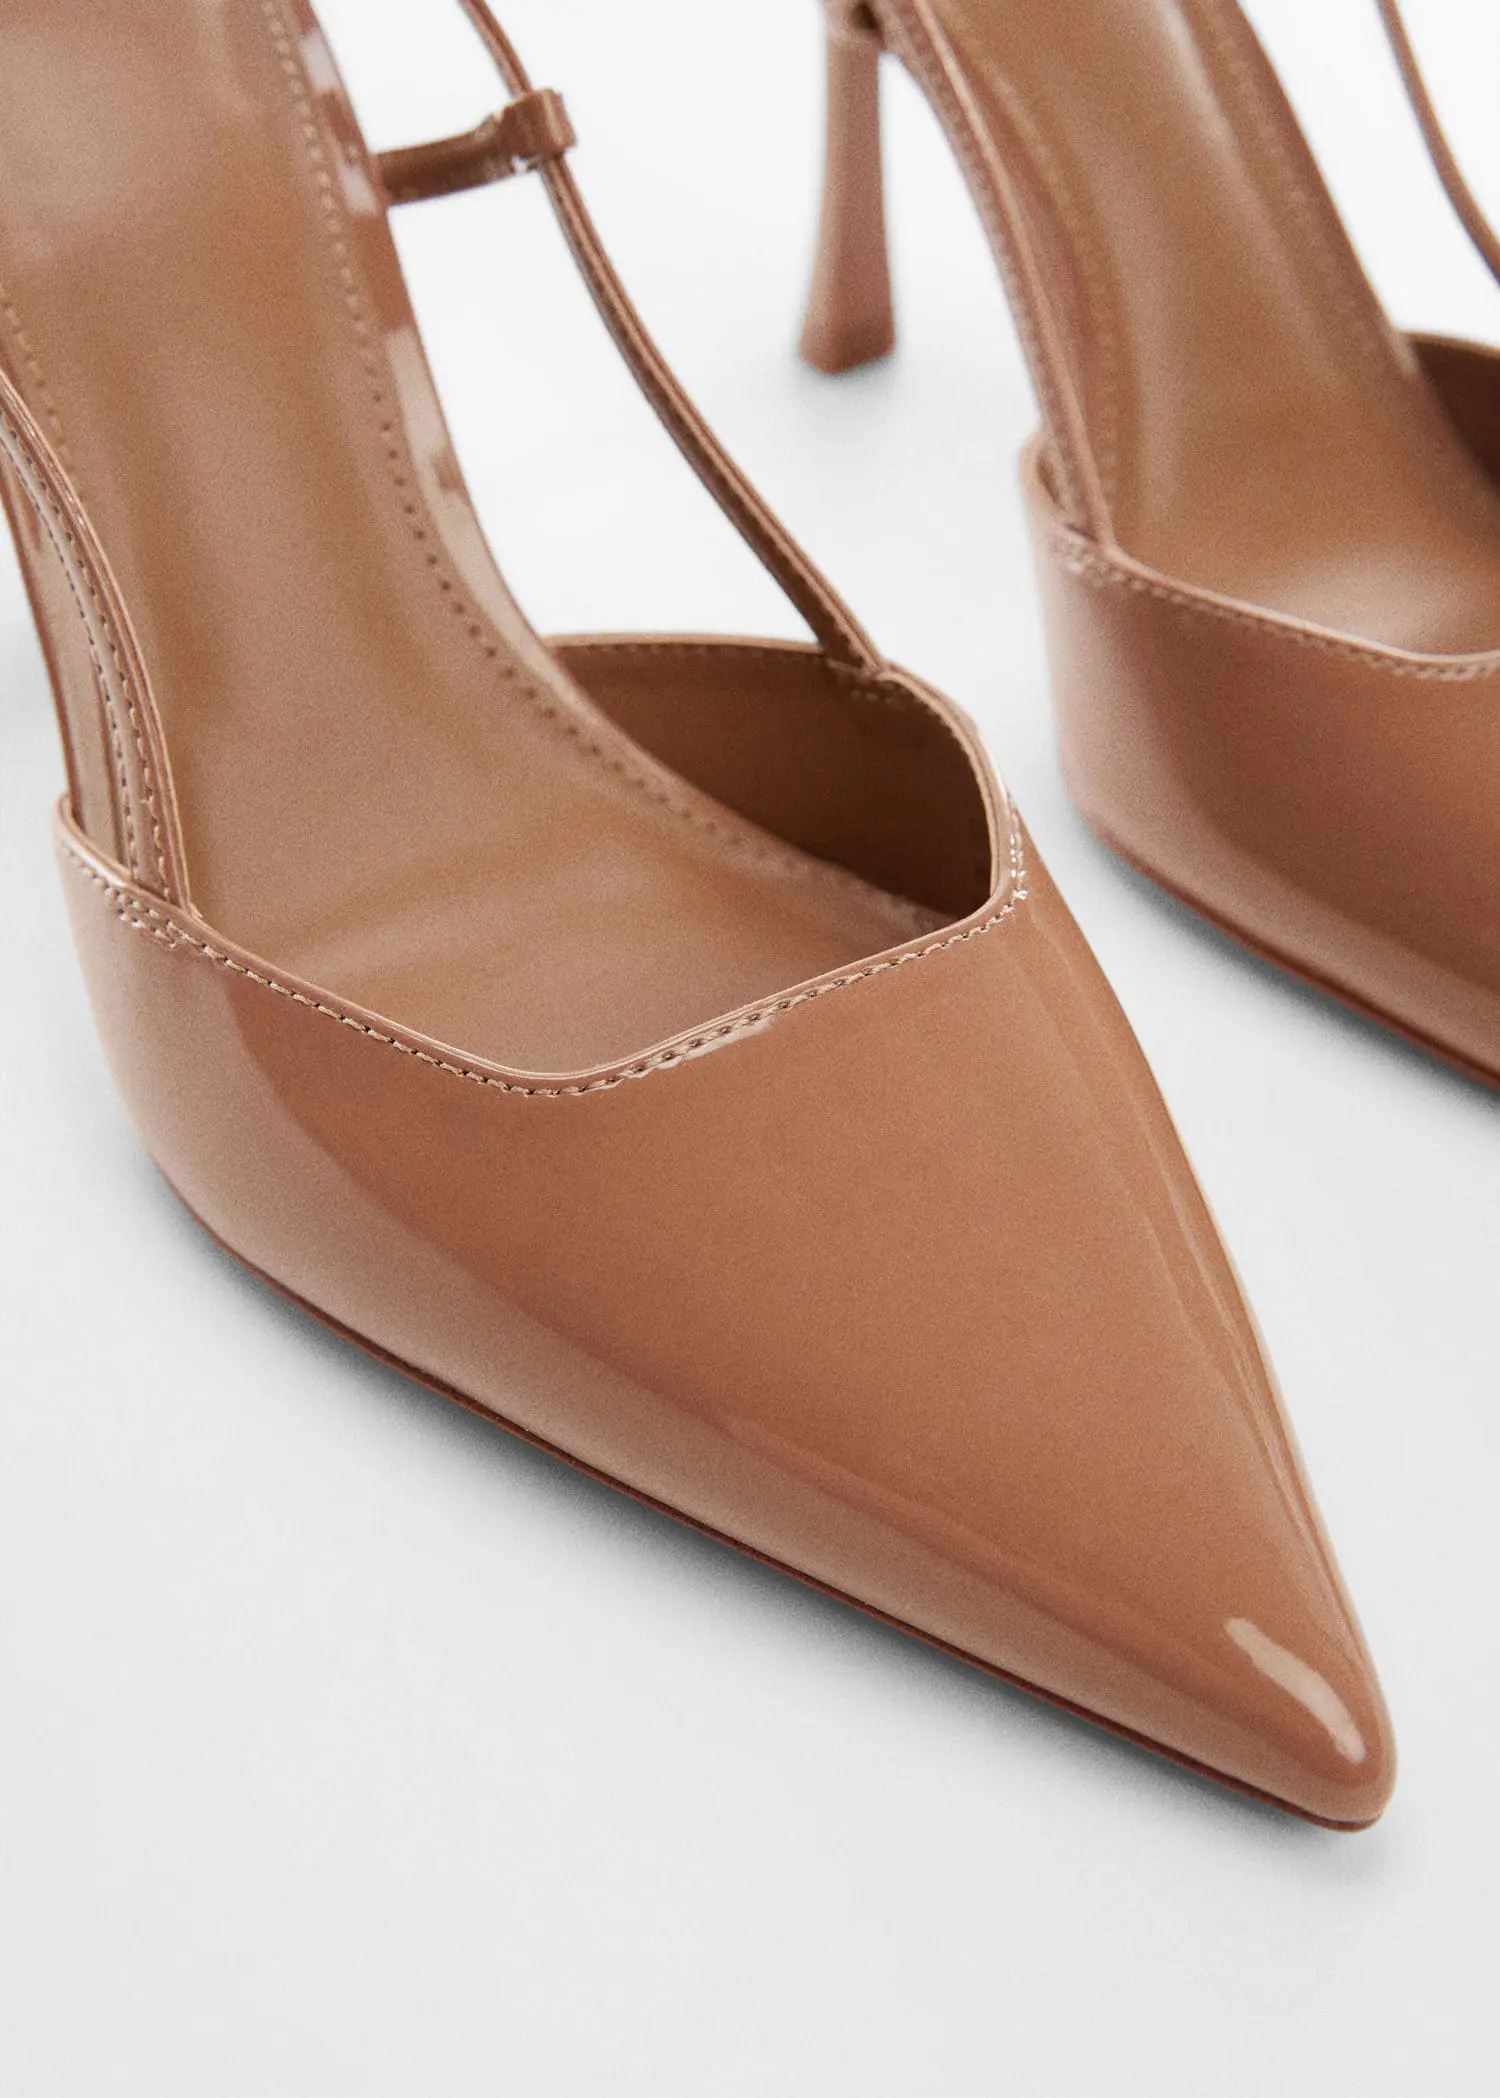 Mango Pointed-toe heeled shoes . a close up of a pair of shoes on a white surface 